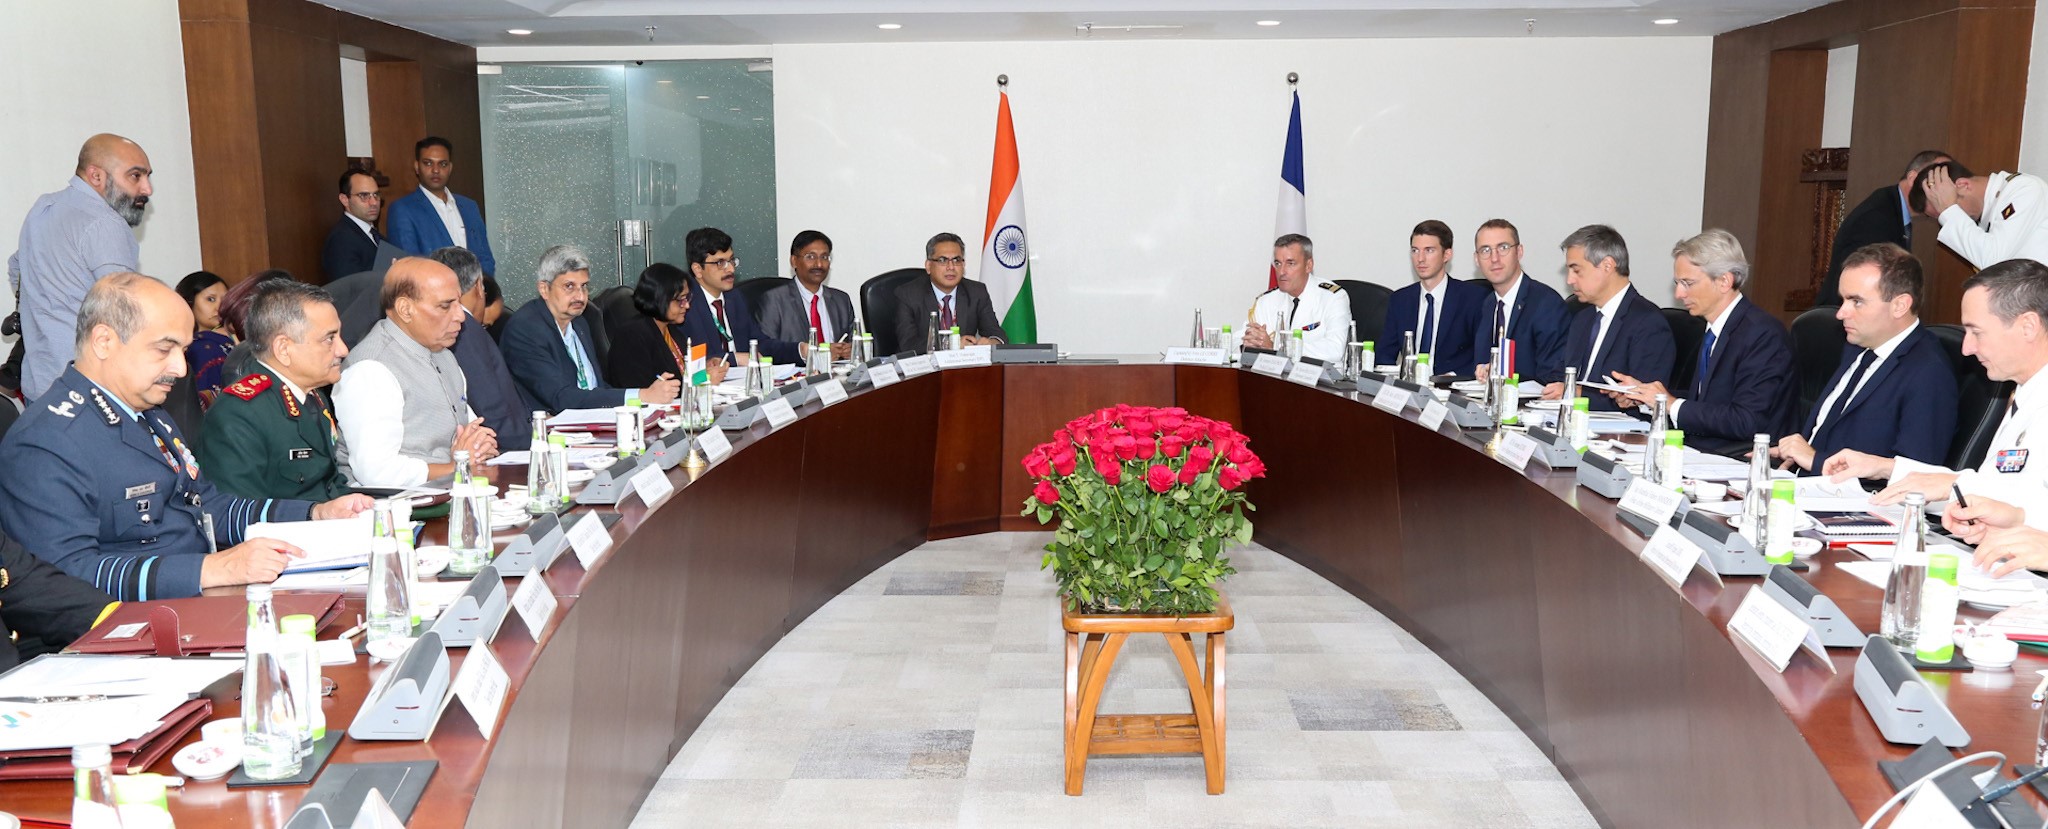 Glimpses of India-France Annual Defence Dialogue co-chaired by the Union Minister for Defence, Shri Rajnath Singh and the Minister of Armed Forces of the French Republic Mr. Sebastien Lecornu, in New Delhi on November 28, 2022.